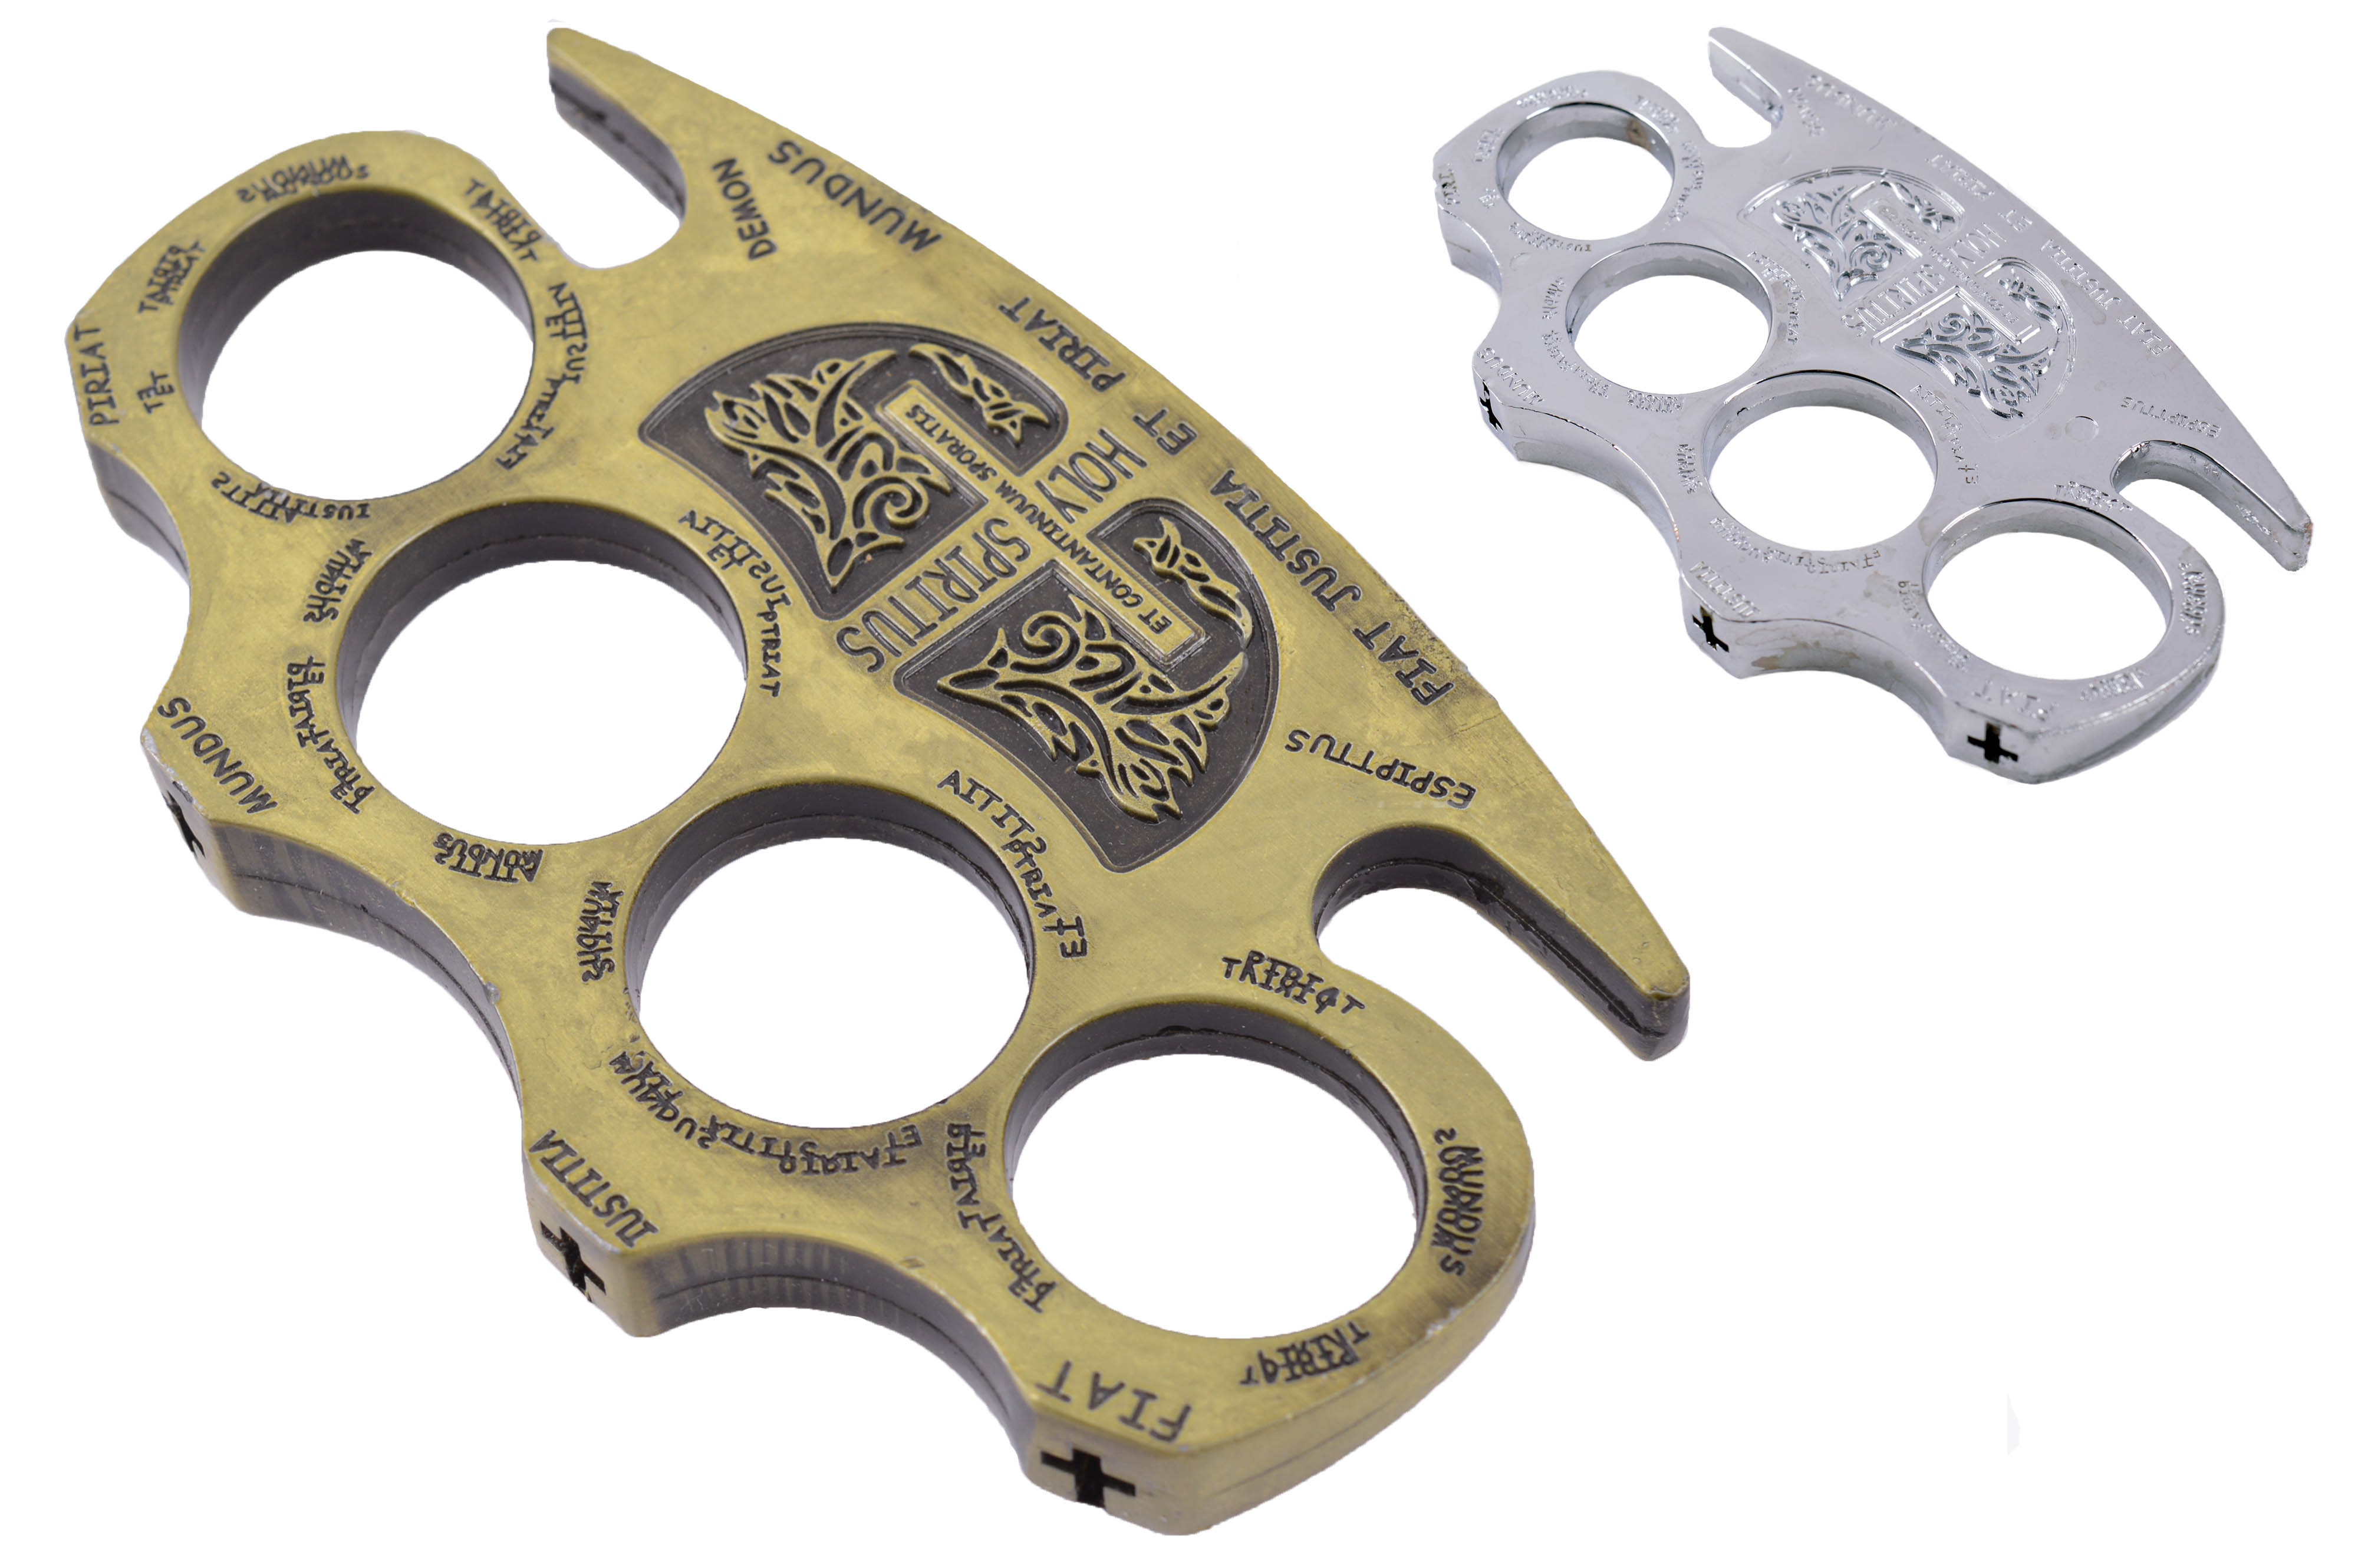 Sold At Auction: WWI British Brass Knuckles Knuckle Duster, 54% OFF